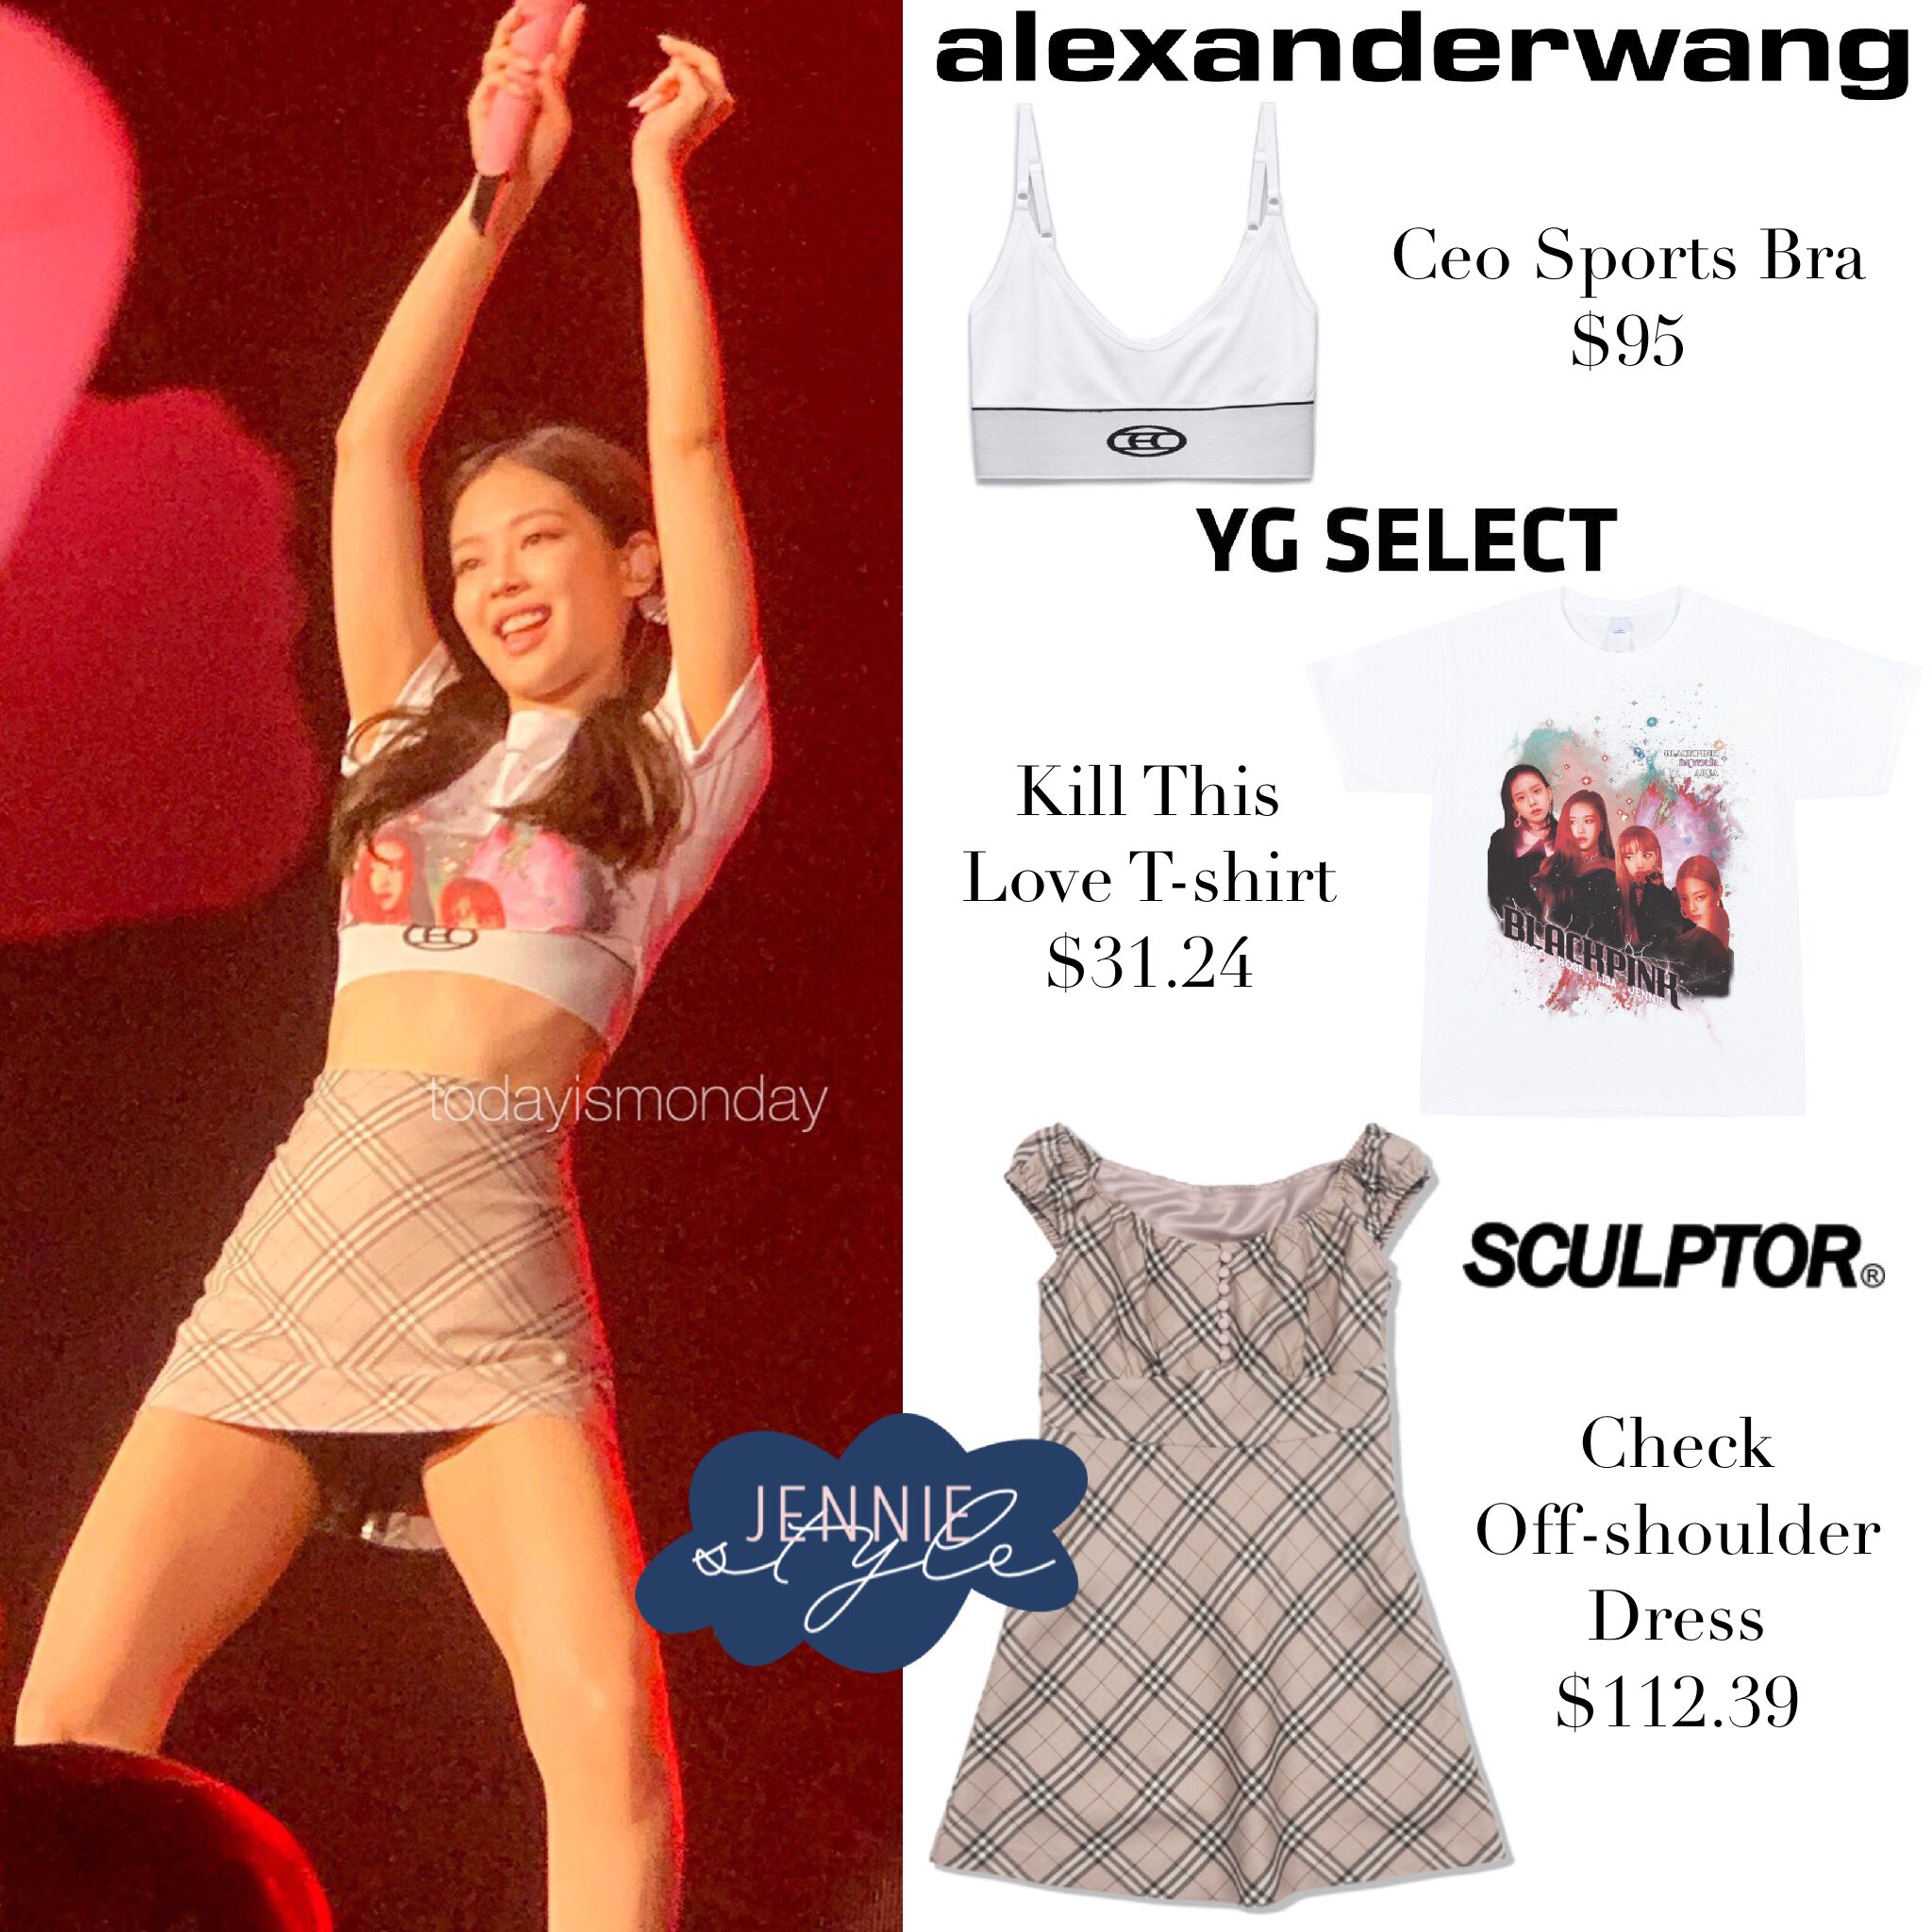 Jennie Style on X: In Your Area in Bangkok D-3 190714 Alexander